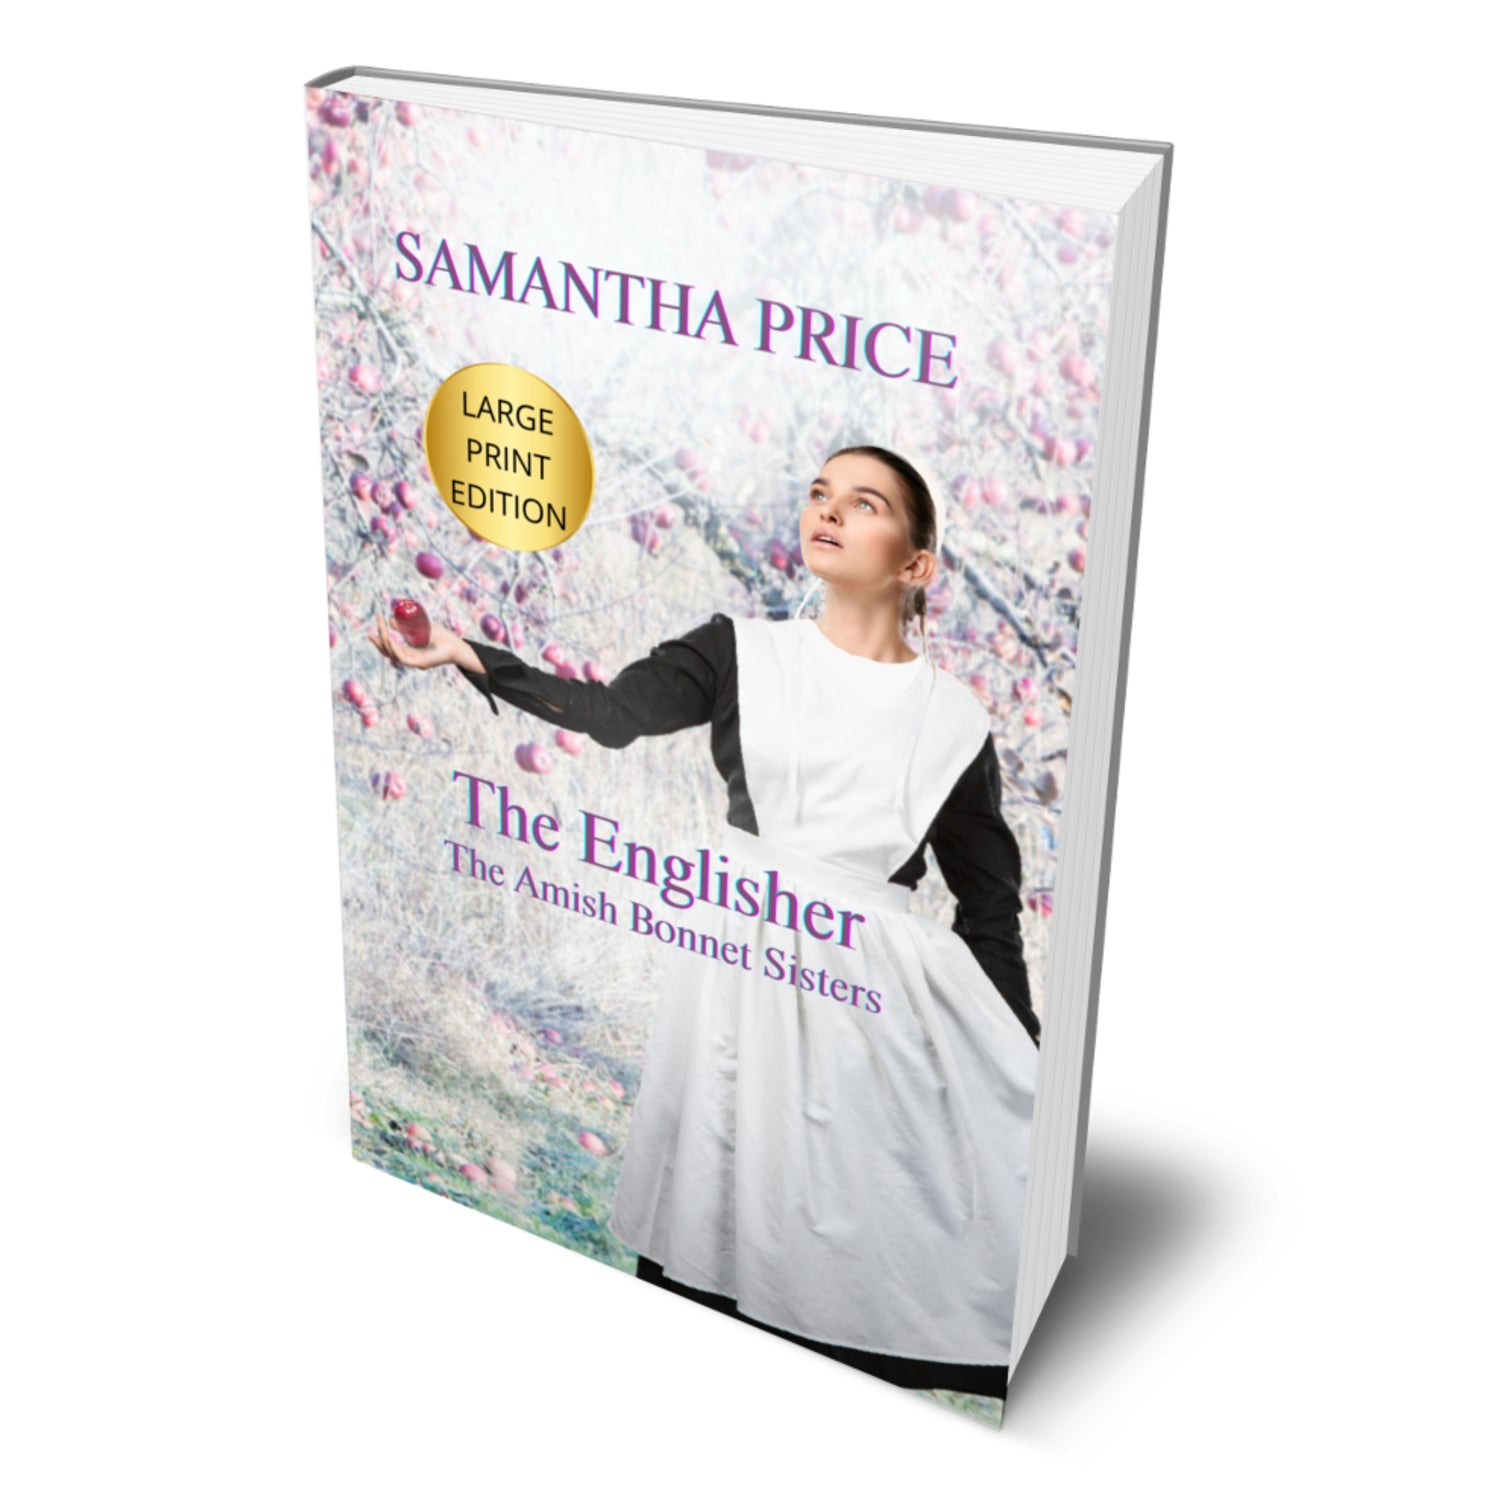 The Englisher (LARGE PRINT PAPERBACK) by Samantha Price